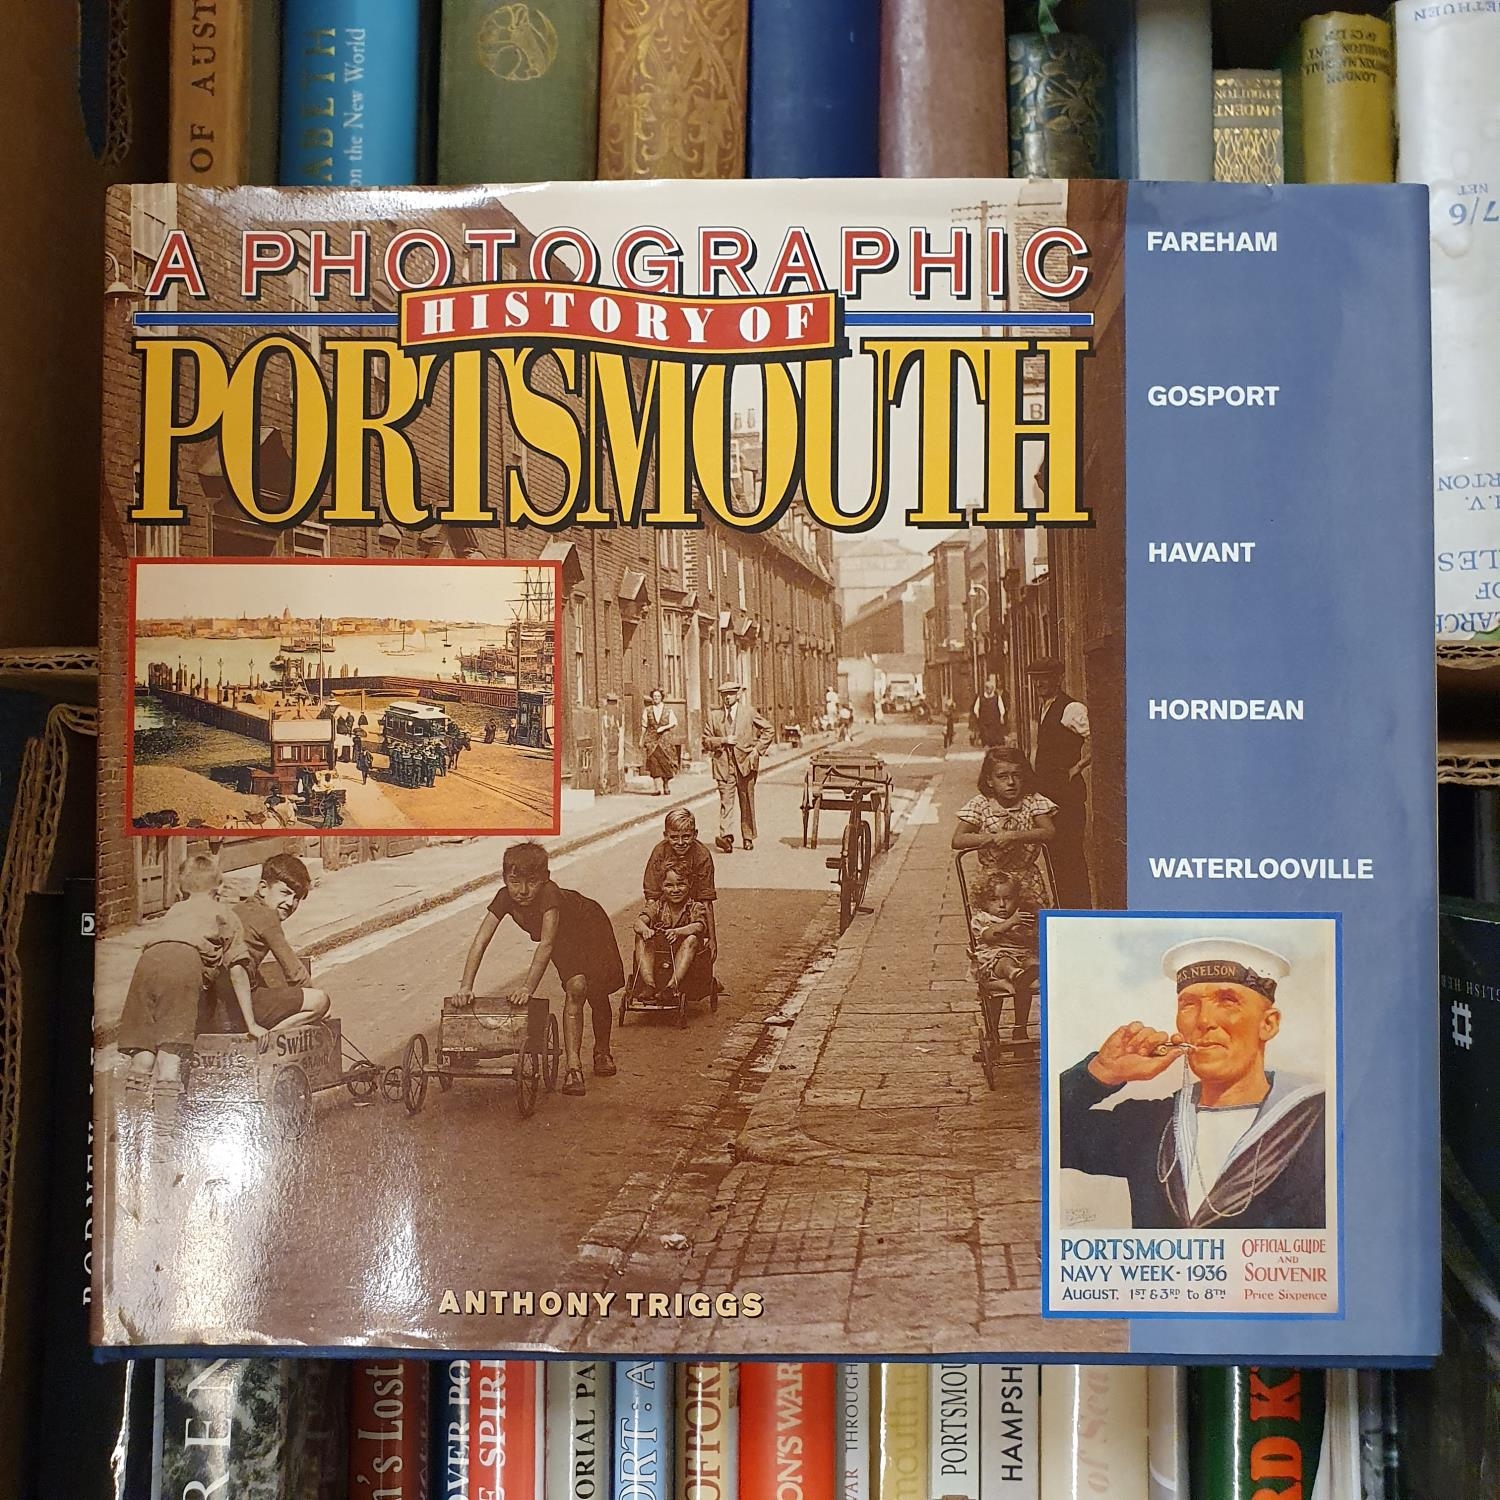 Triggs (Anthony) A Photographic History of Portsmouth, and various other books (4 boxes)